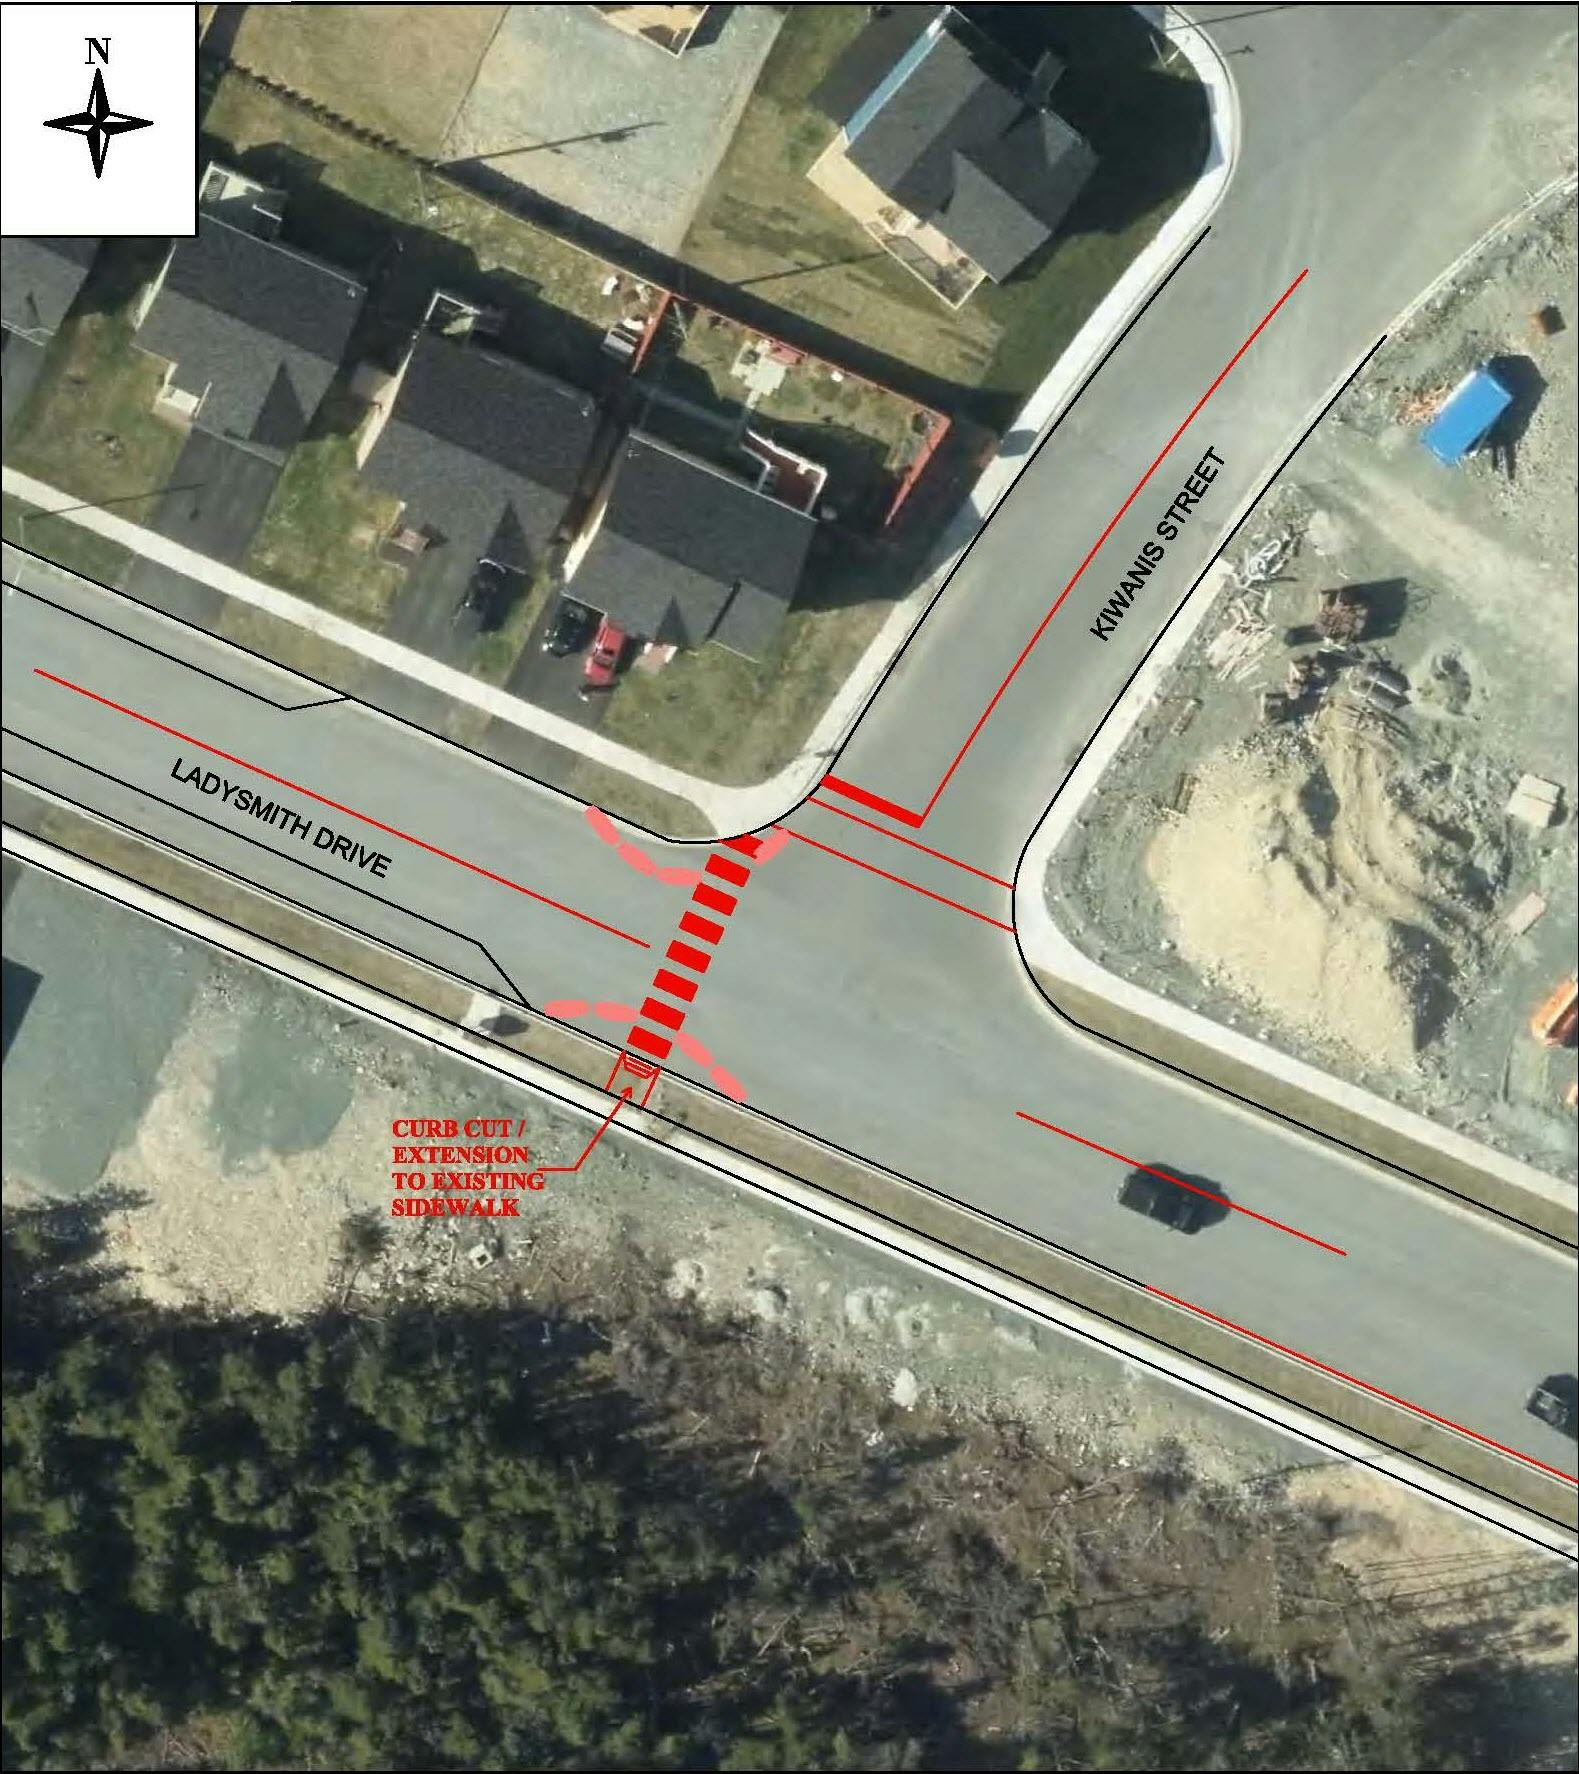 Ladysmith Drive and Kiwanis Street – Curb Extensions and Crosswalk